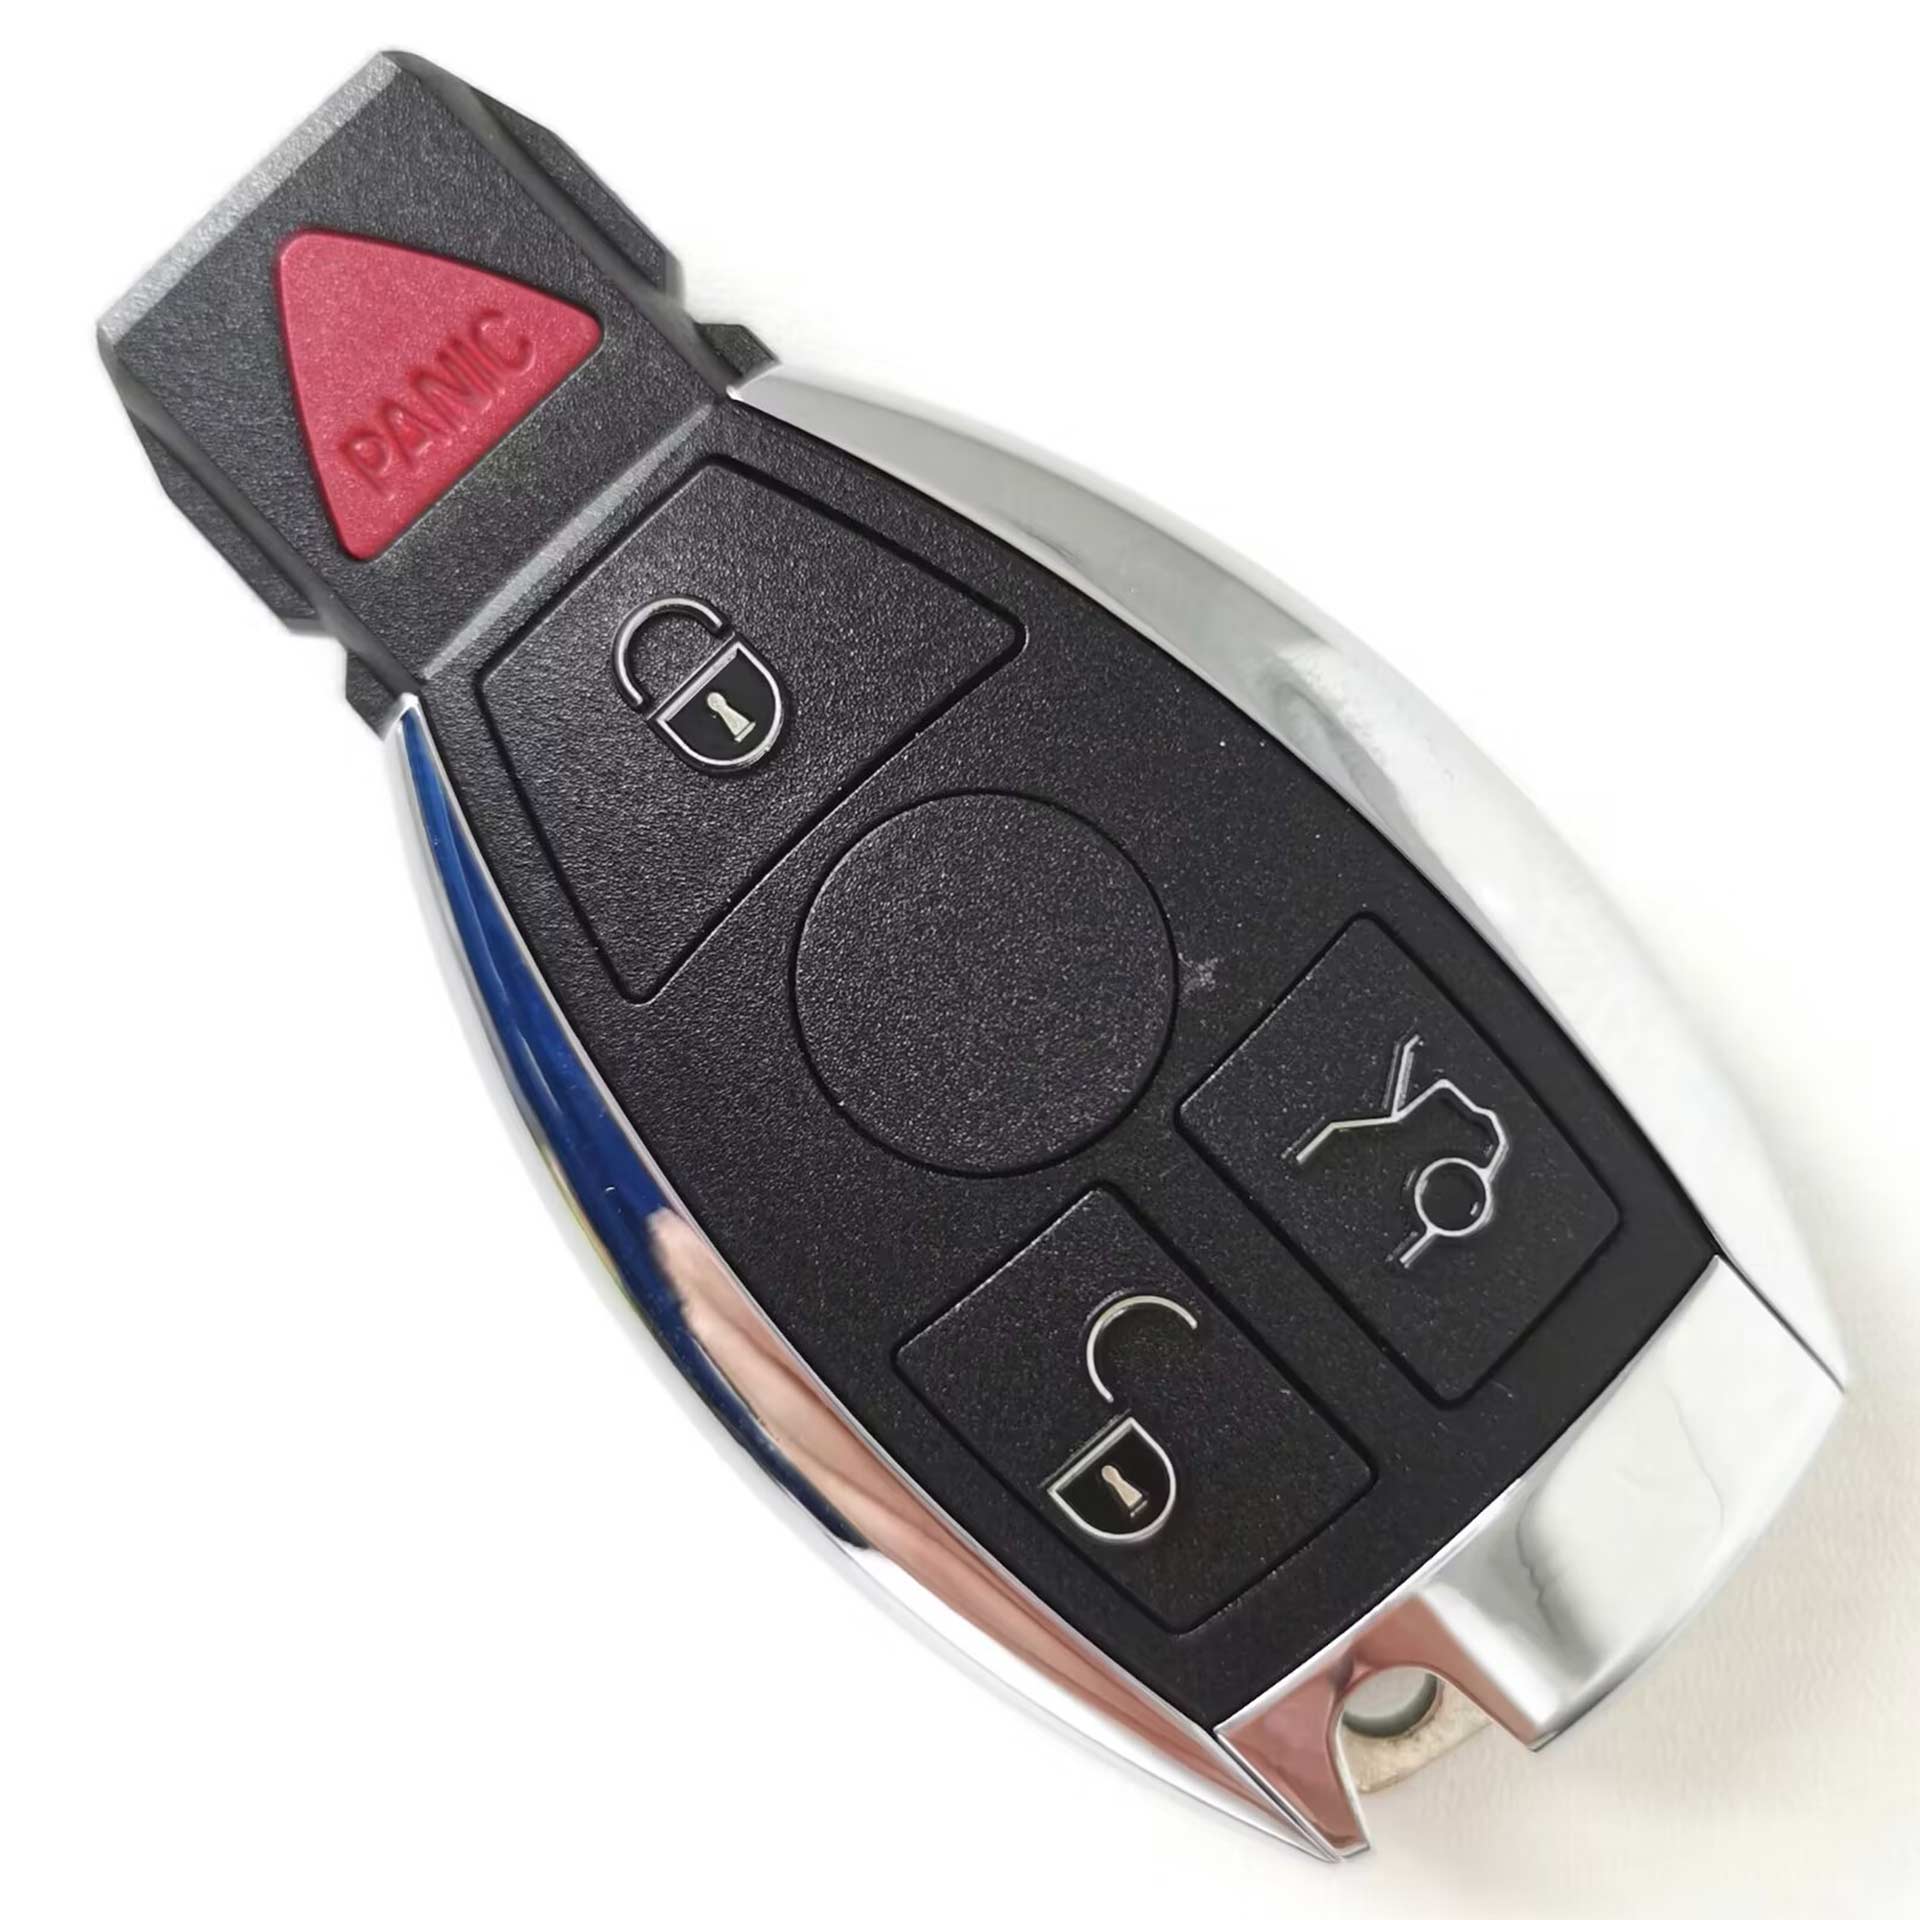 V3.3 VVDI BE Remote Key for Mercedes Benz - with Best Quality Shell